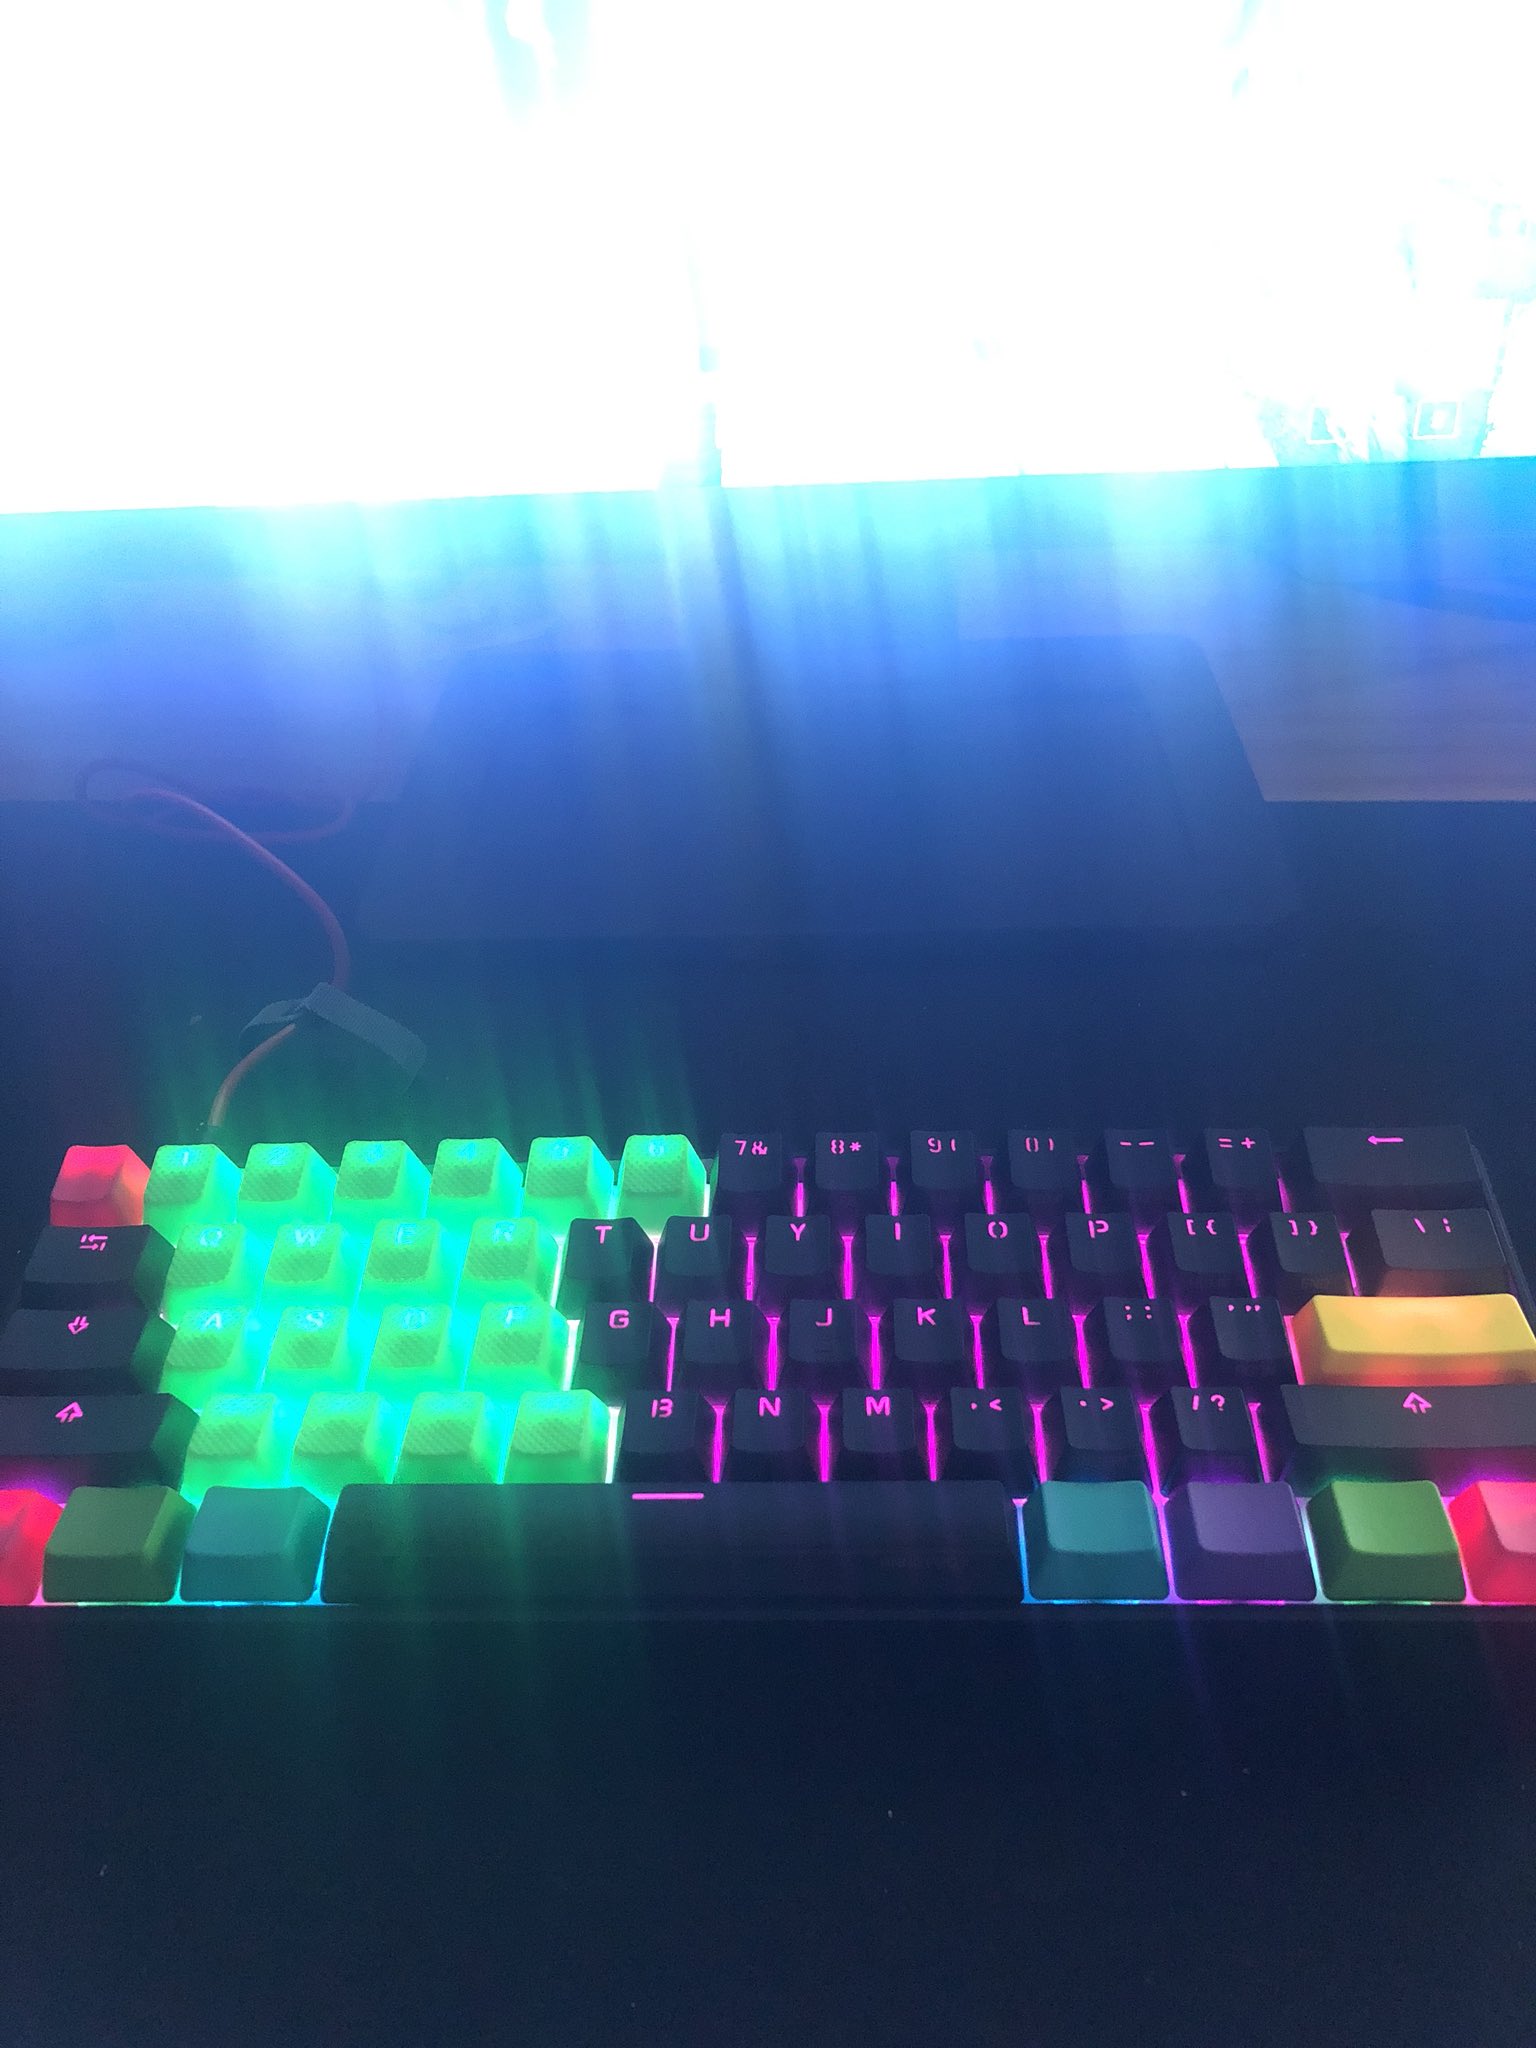 Analytisch Dokter Bepalen cloakzy on Twitter: "Tfue gave me a keyboard if I stayed and scrimmed  tonight instead of flying. Worth it. LOOK AT THIS BEAUTY MAN WTF REAL  TEAMMATE 😭😭🥇 https://t.co/BiSPPqEXdj" / Twitter